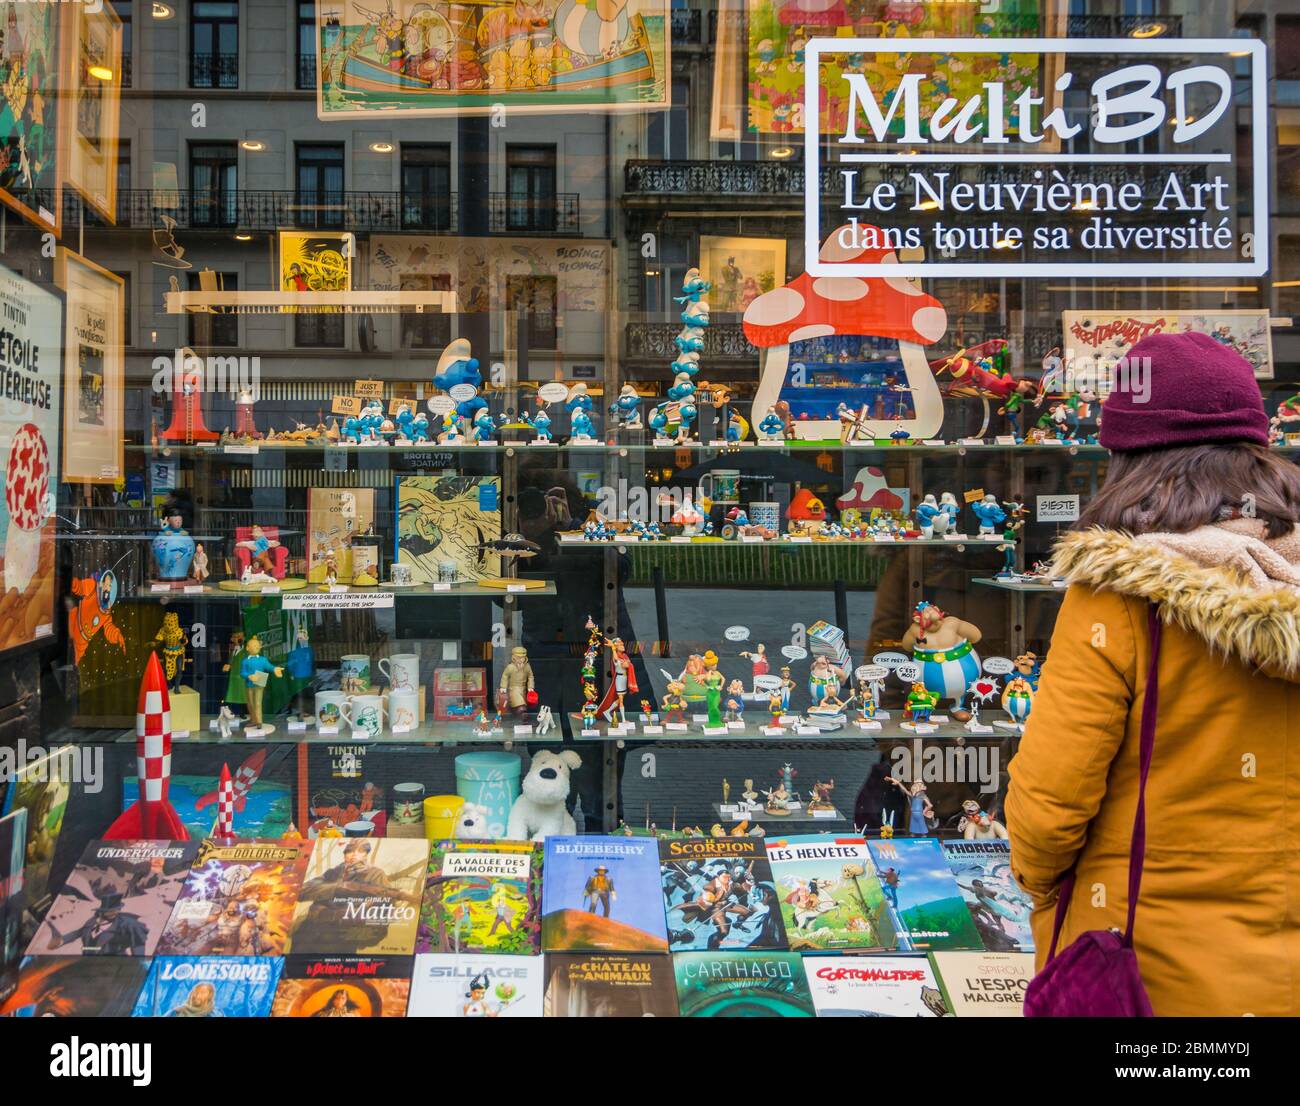 Multi -BD Belgian comic book store in Brussels city (122-124 bd Anspach) - Brussels, Belgium - 1 january 2020 Stock Photo